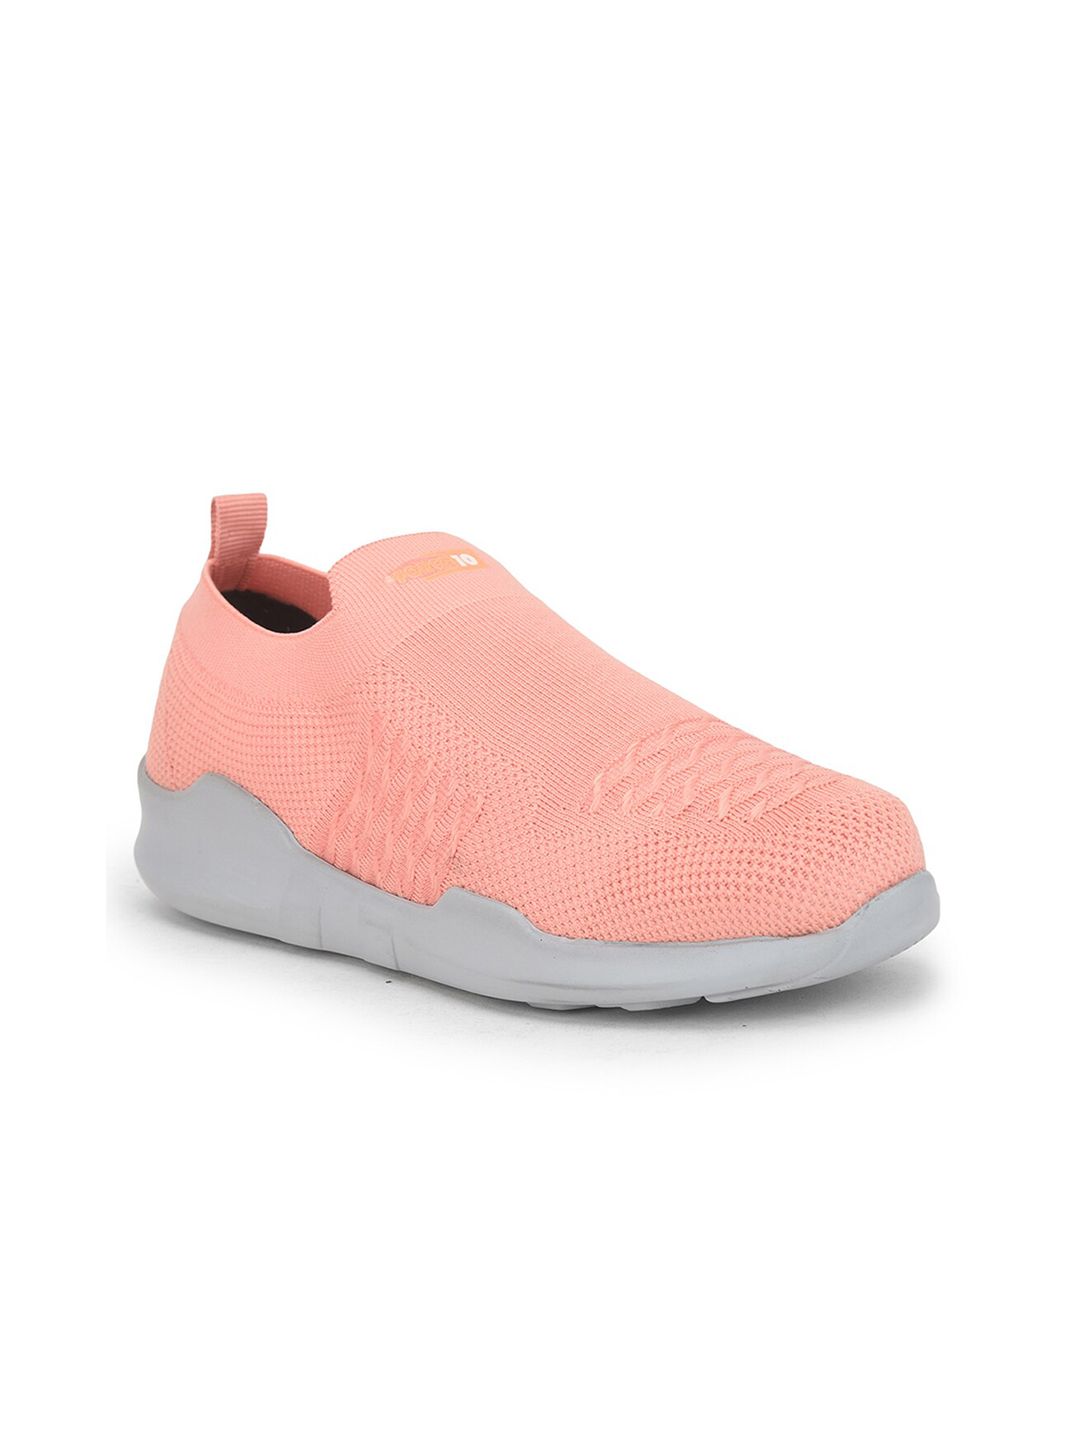 Liberty Women Peach-Coloured Mesh Walking Non-Marking Shoes Price in India